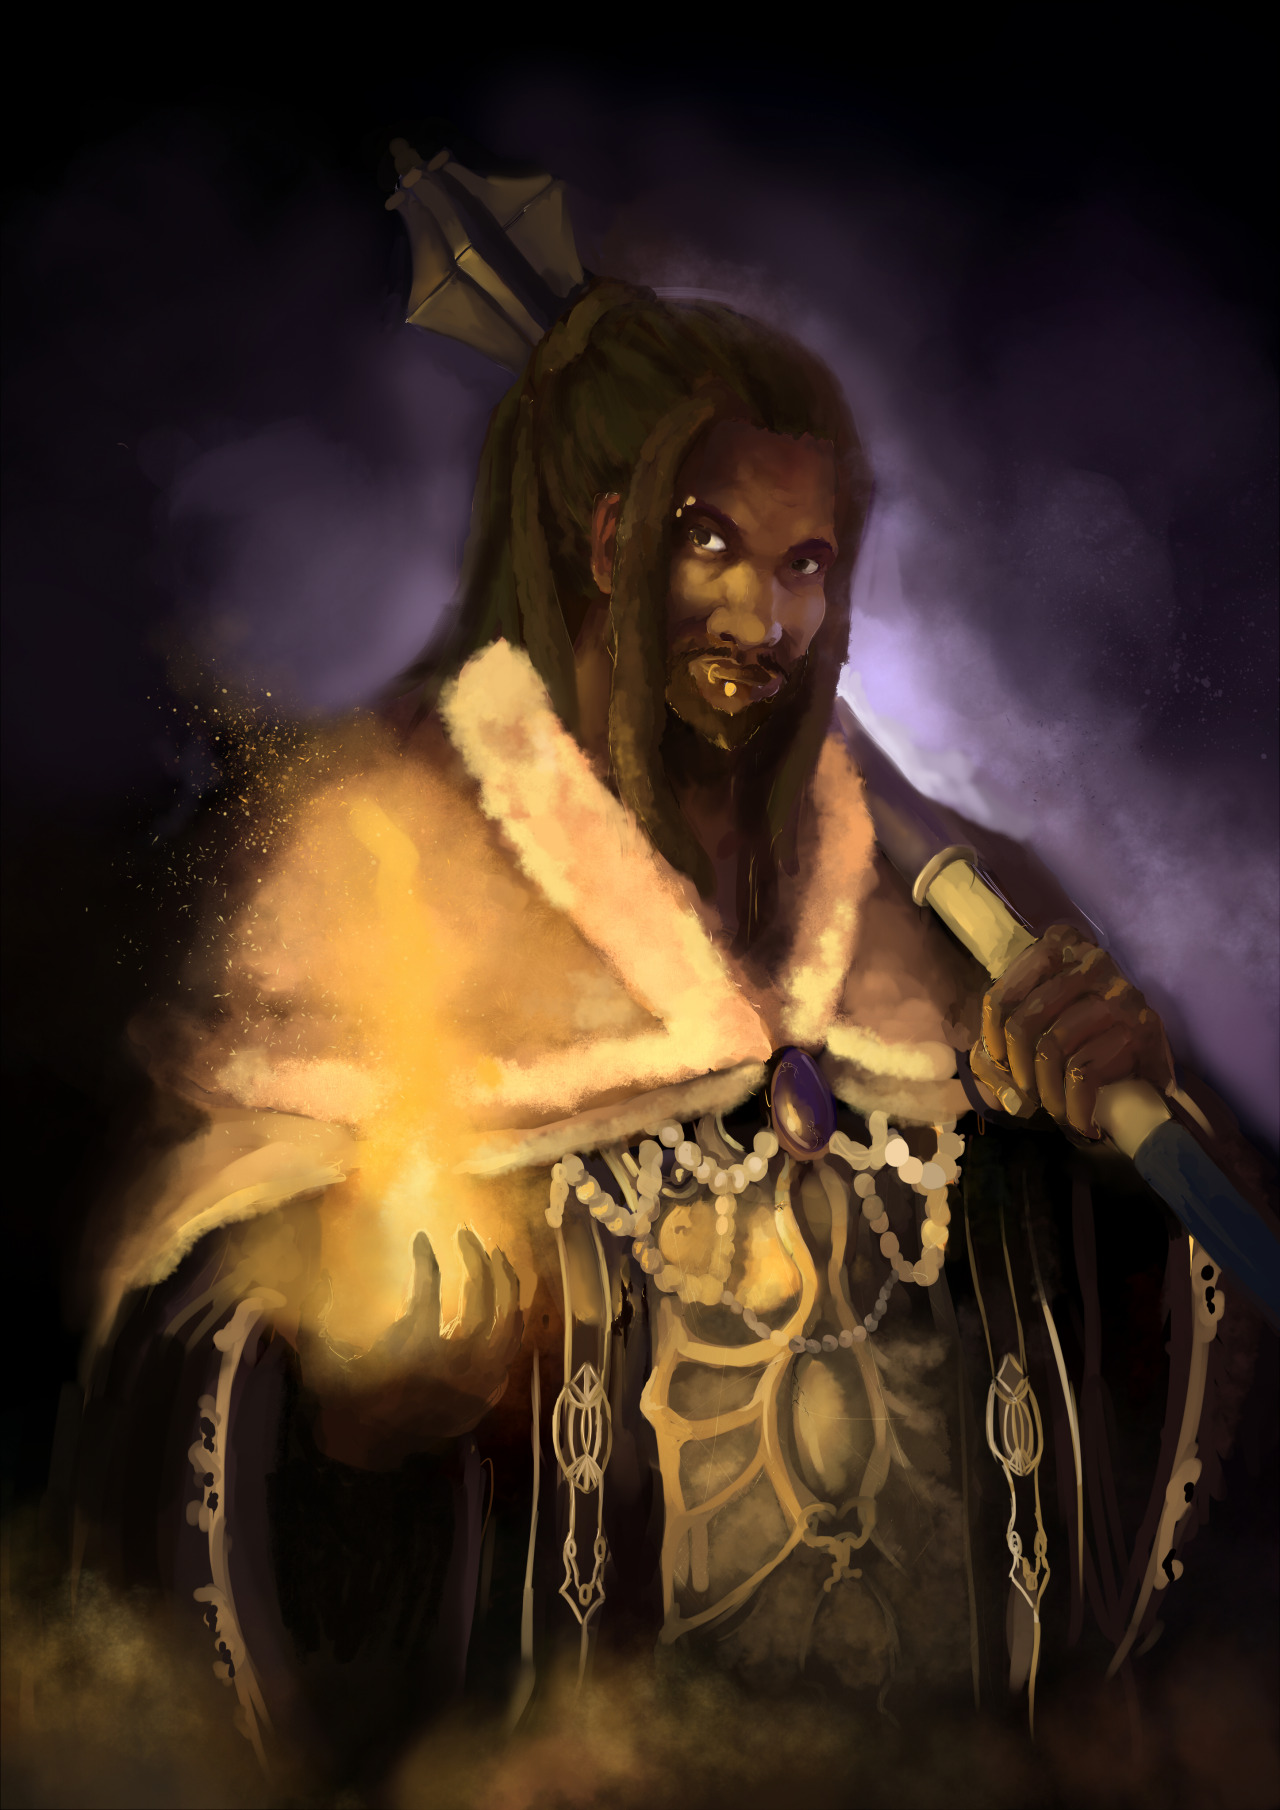 itsthemothman:
“ The mysterious undead Cleric Woolsworth. Woolie’s Dark souls 2 character
”